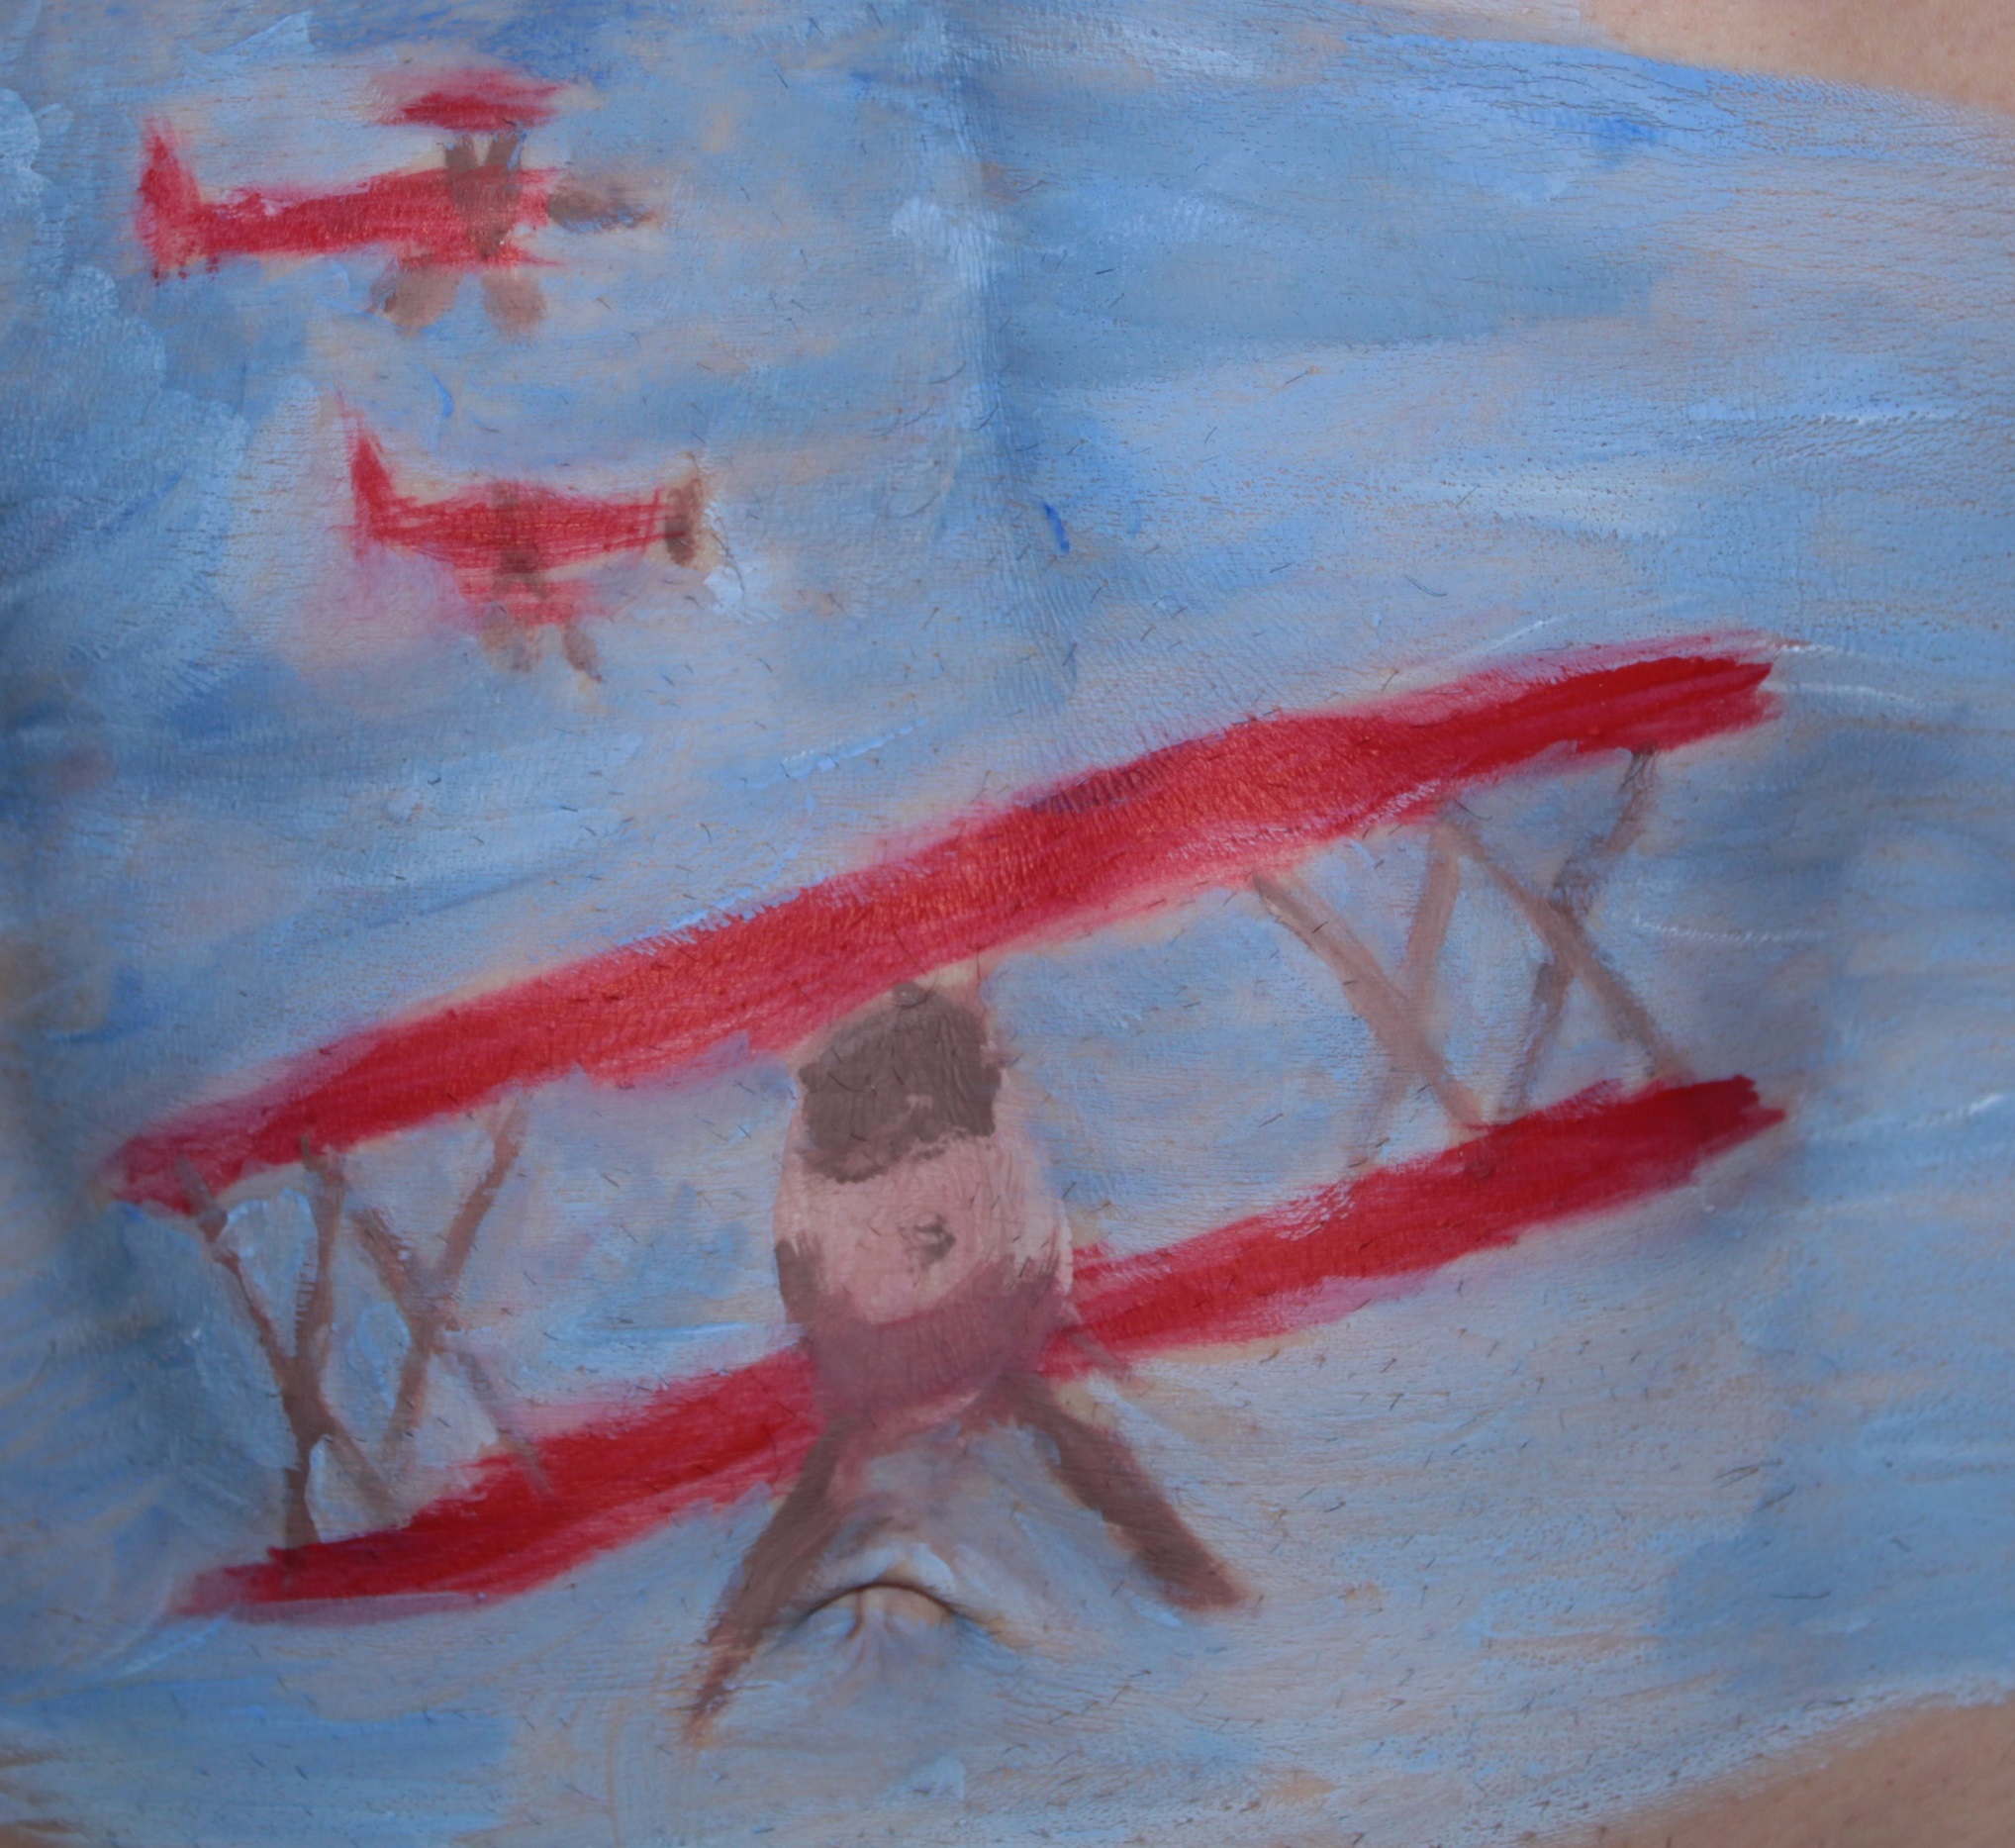 red bi-planes in the air painted on male torso